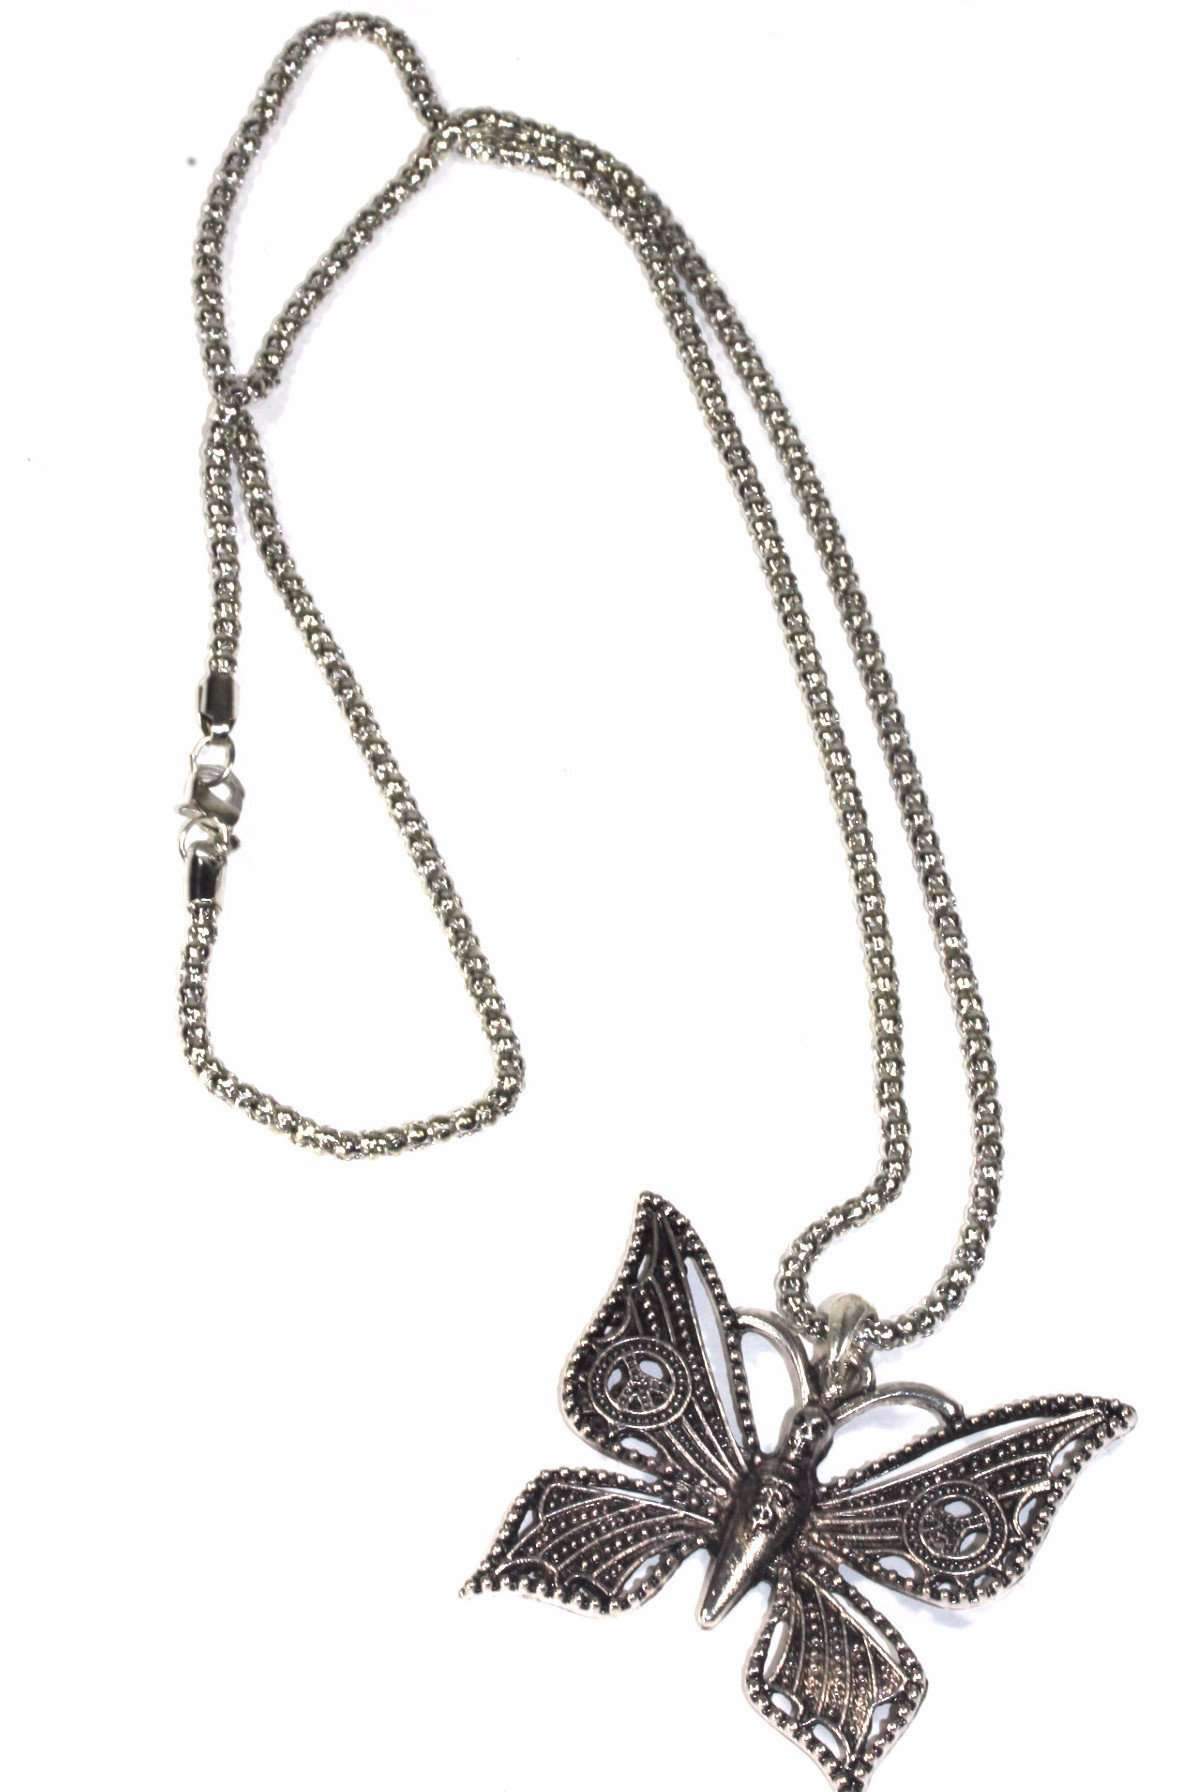 Silver Gothic Butterfly Necklace with Peace Signs and Skull Head Pendant - Necklaces - Bijou Her -  -  - 